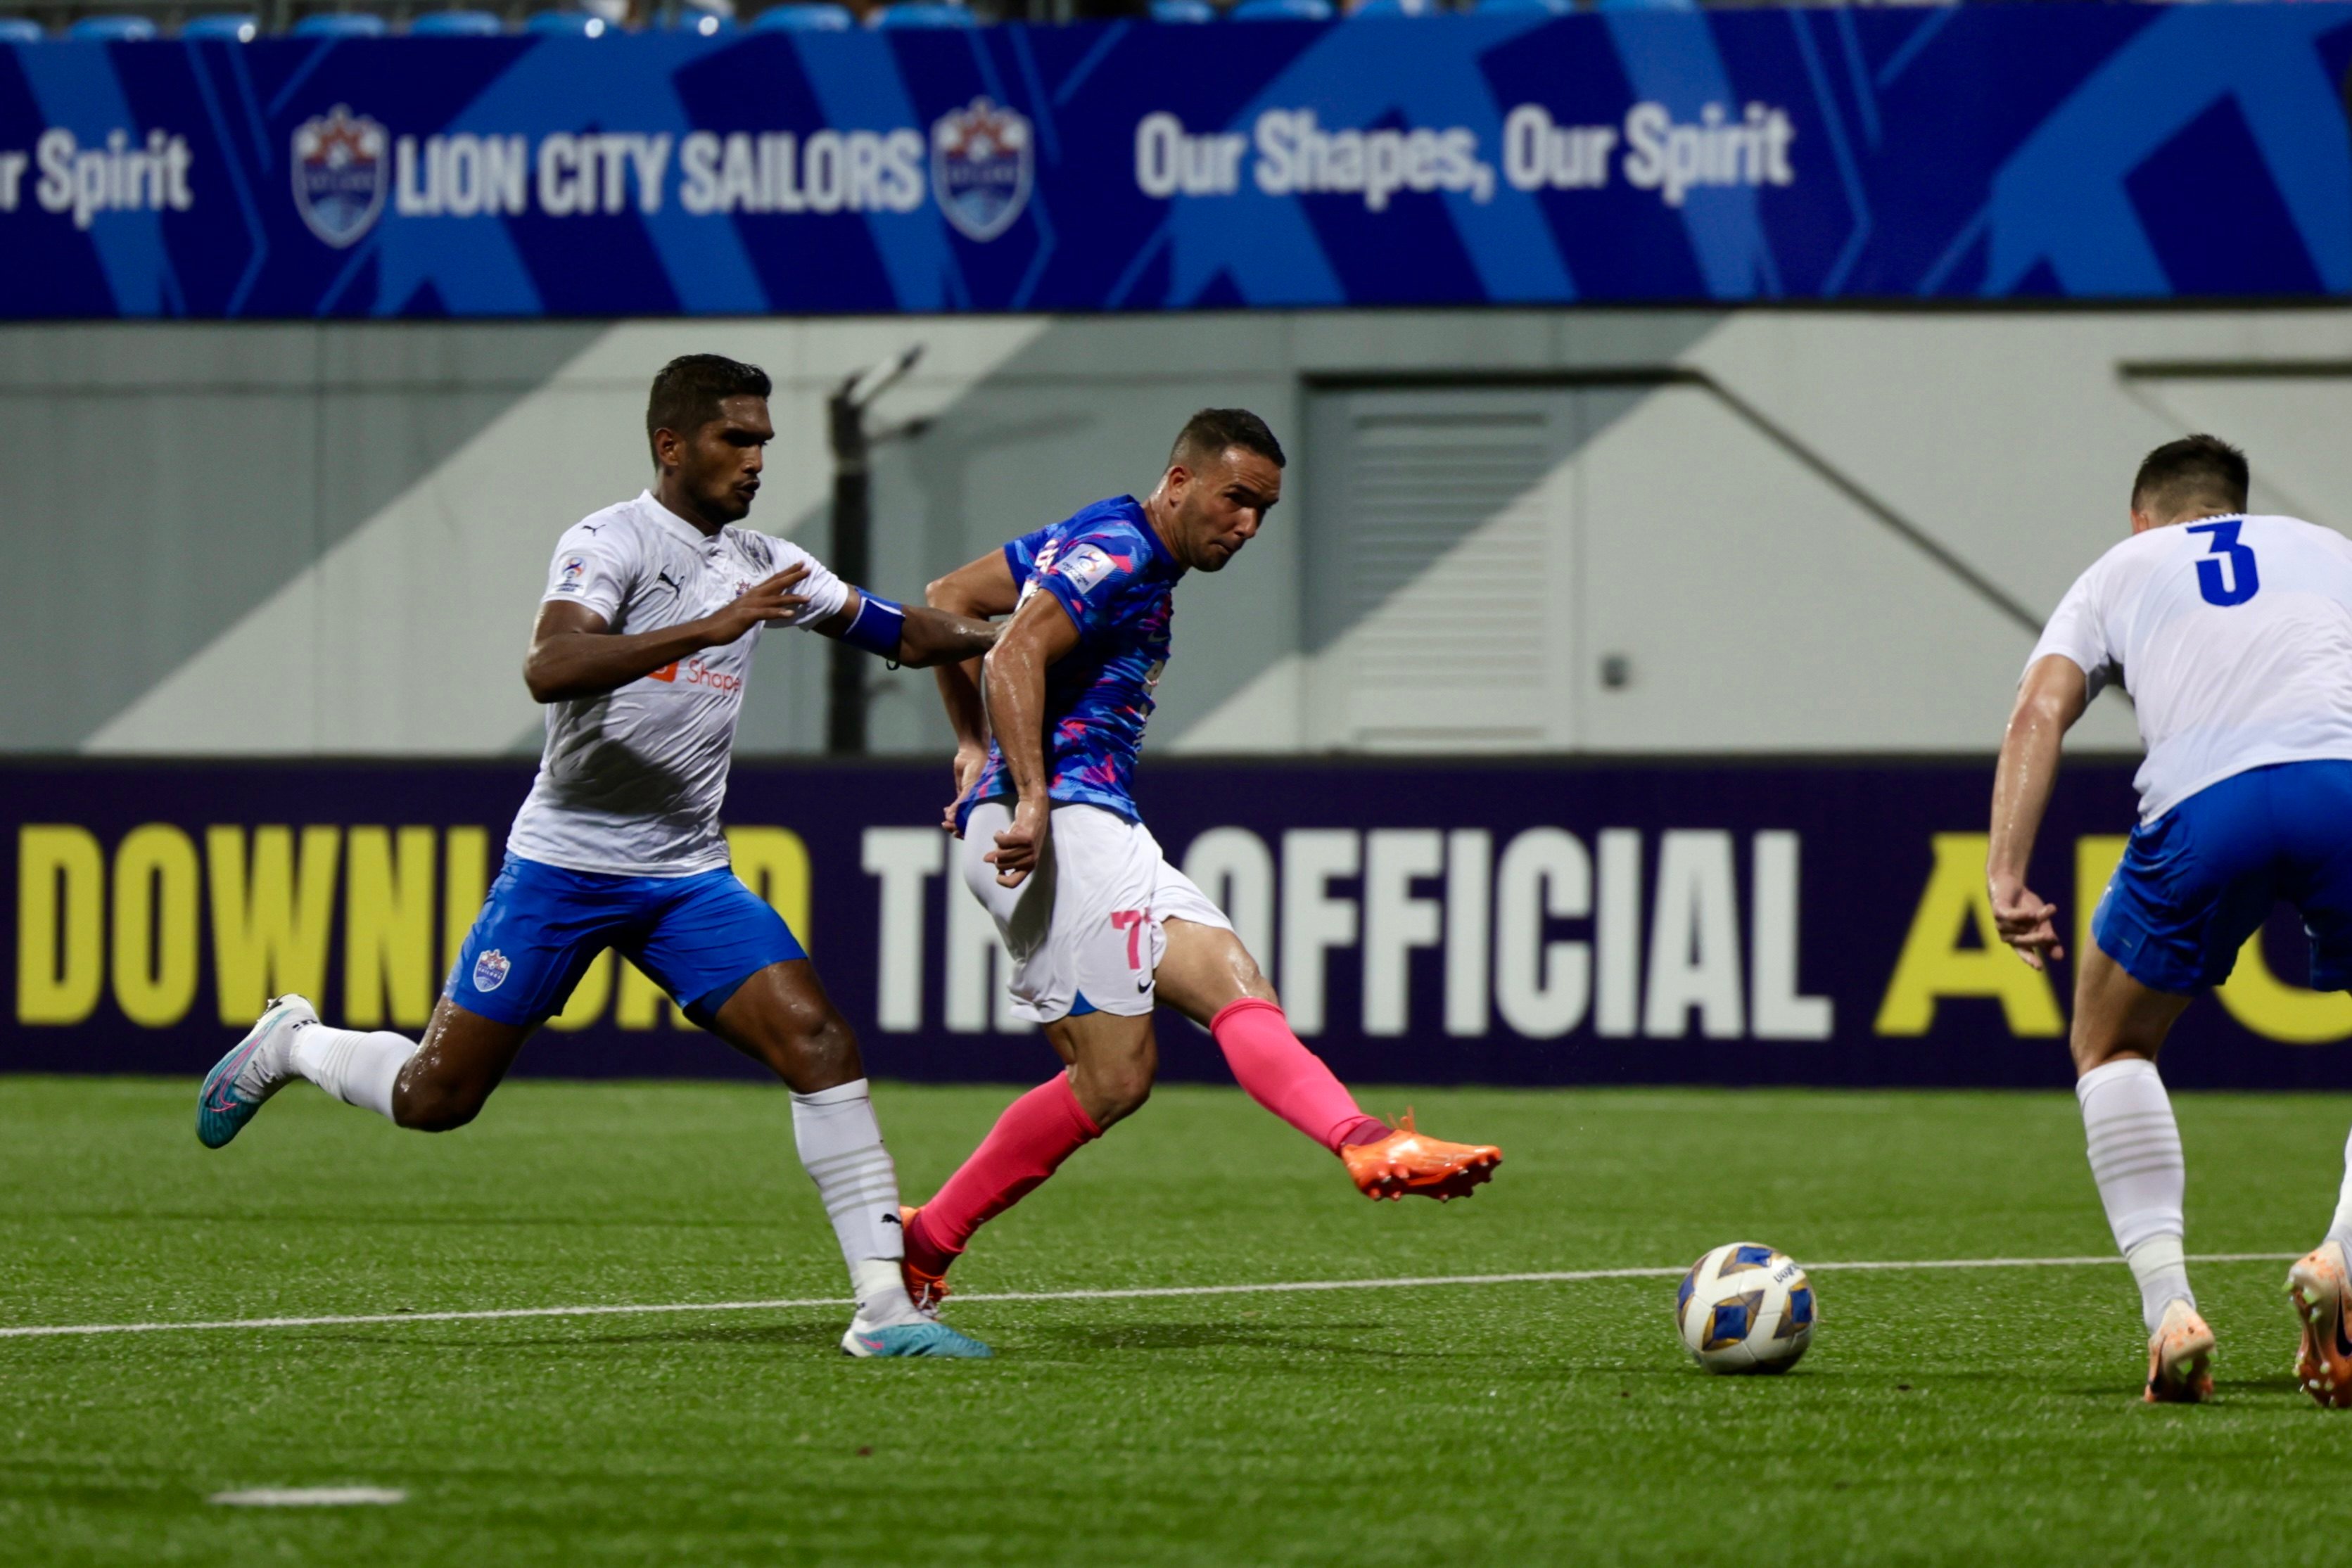 Fernando (centre) scores Kitchee’s second goal in their 2-0 win over Lion City Sailors. Photo: Kitchee